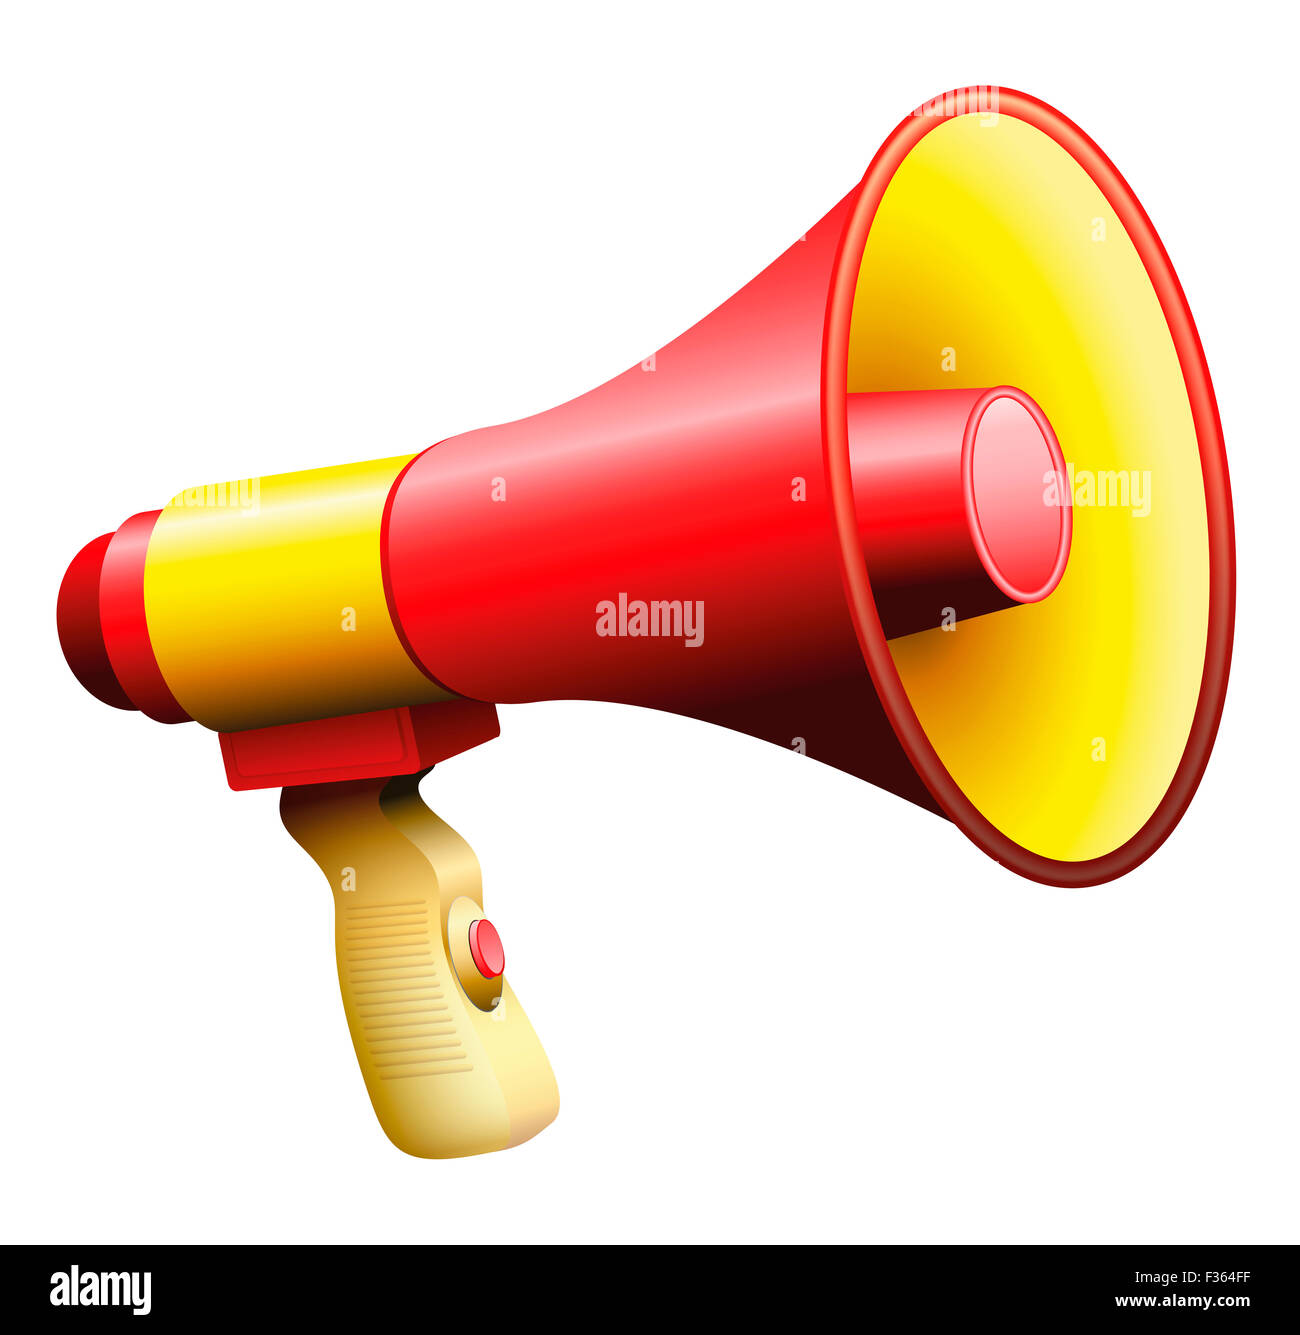 Bullhorn or megaphone, red and yellow, with handle and on button. Stock Photo